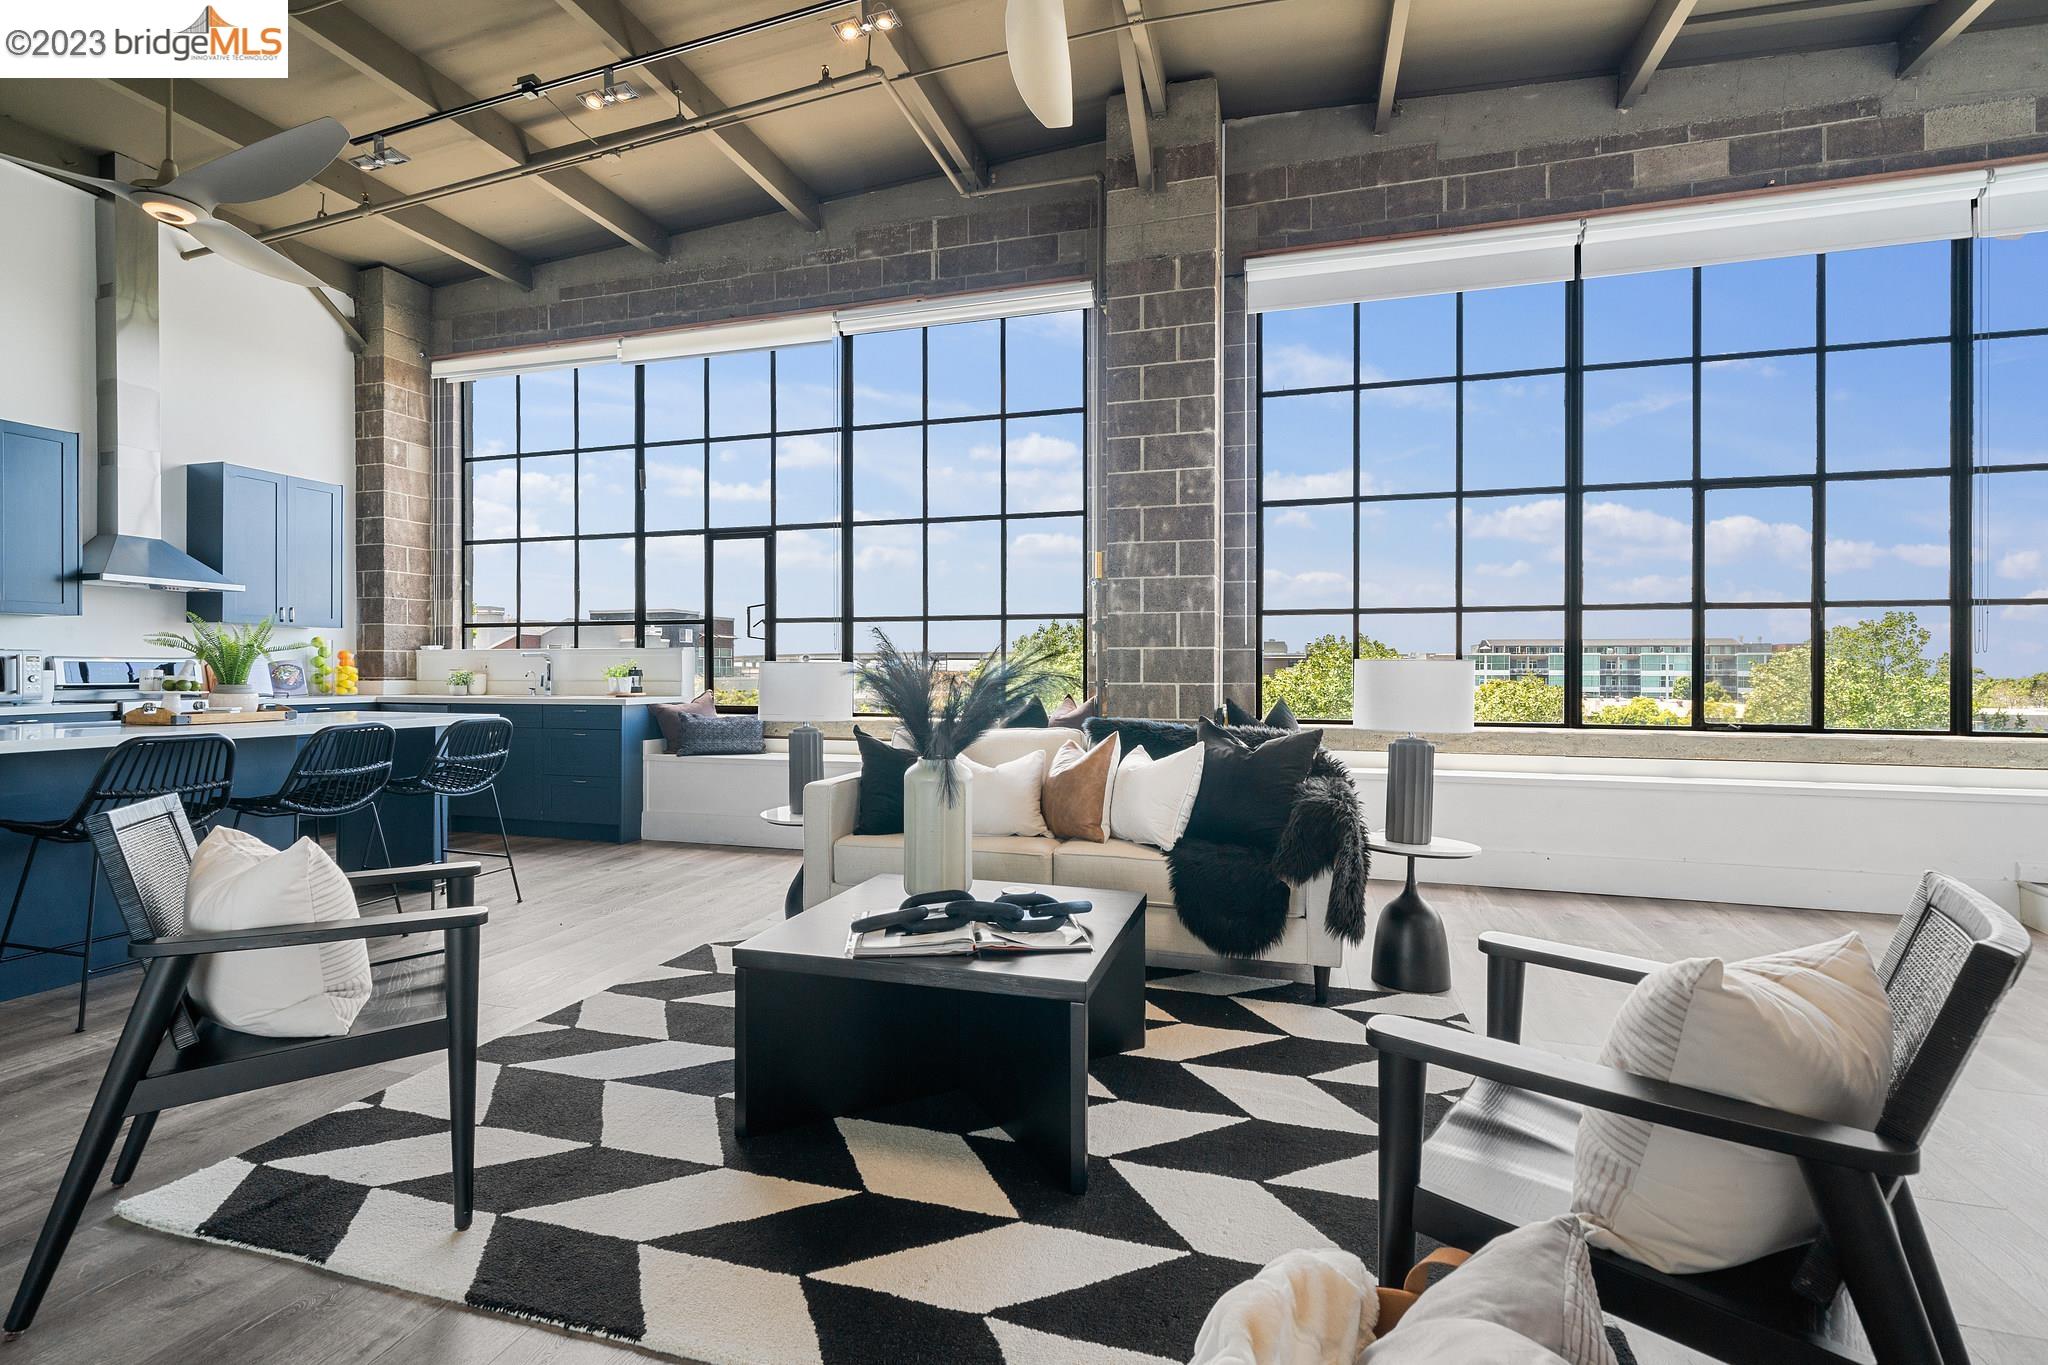 You might also be interested in BESLER BUILDING LOFTS